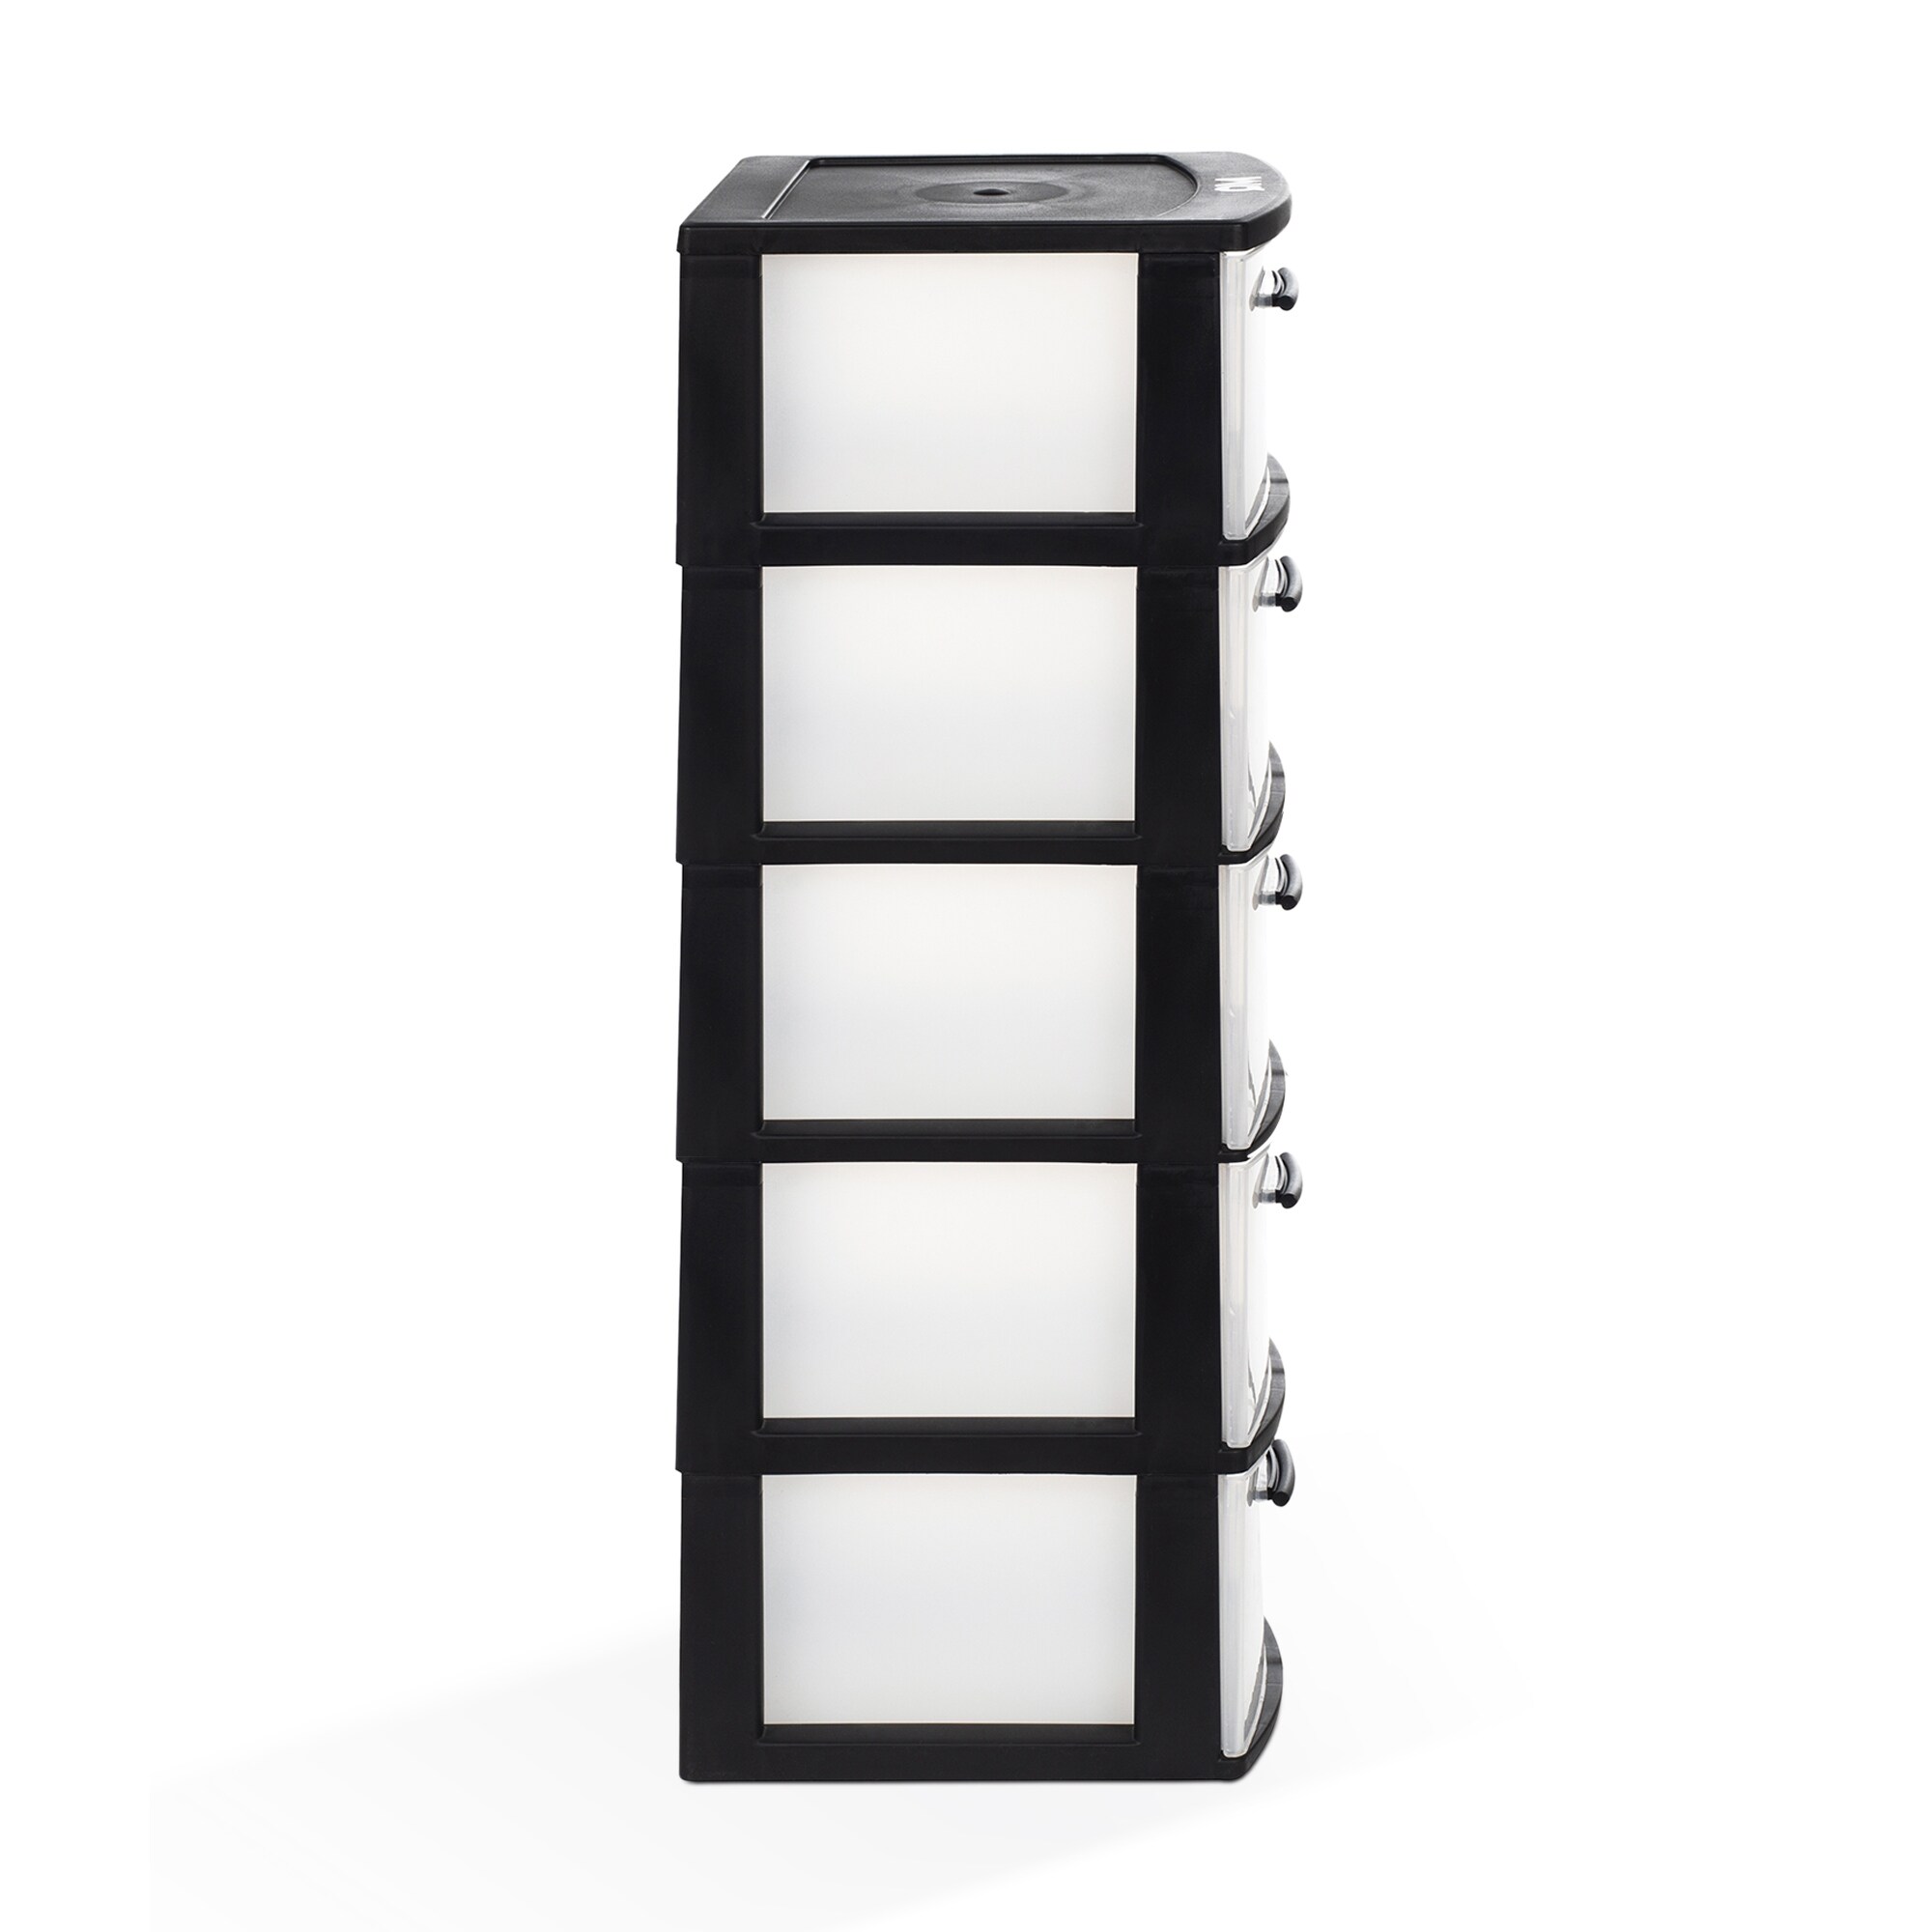 https://ak1.ostkcdn.com/images/products/is/images/direct/bf7d6049778945ec2a7d1ceab6a0773f496e3847/MQ-Eclypse-5-Drawer-Plastic-Storage-Unit-with-Clear-Drawers-%282-Pack%29.jpg